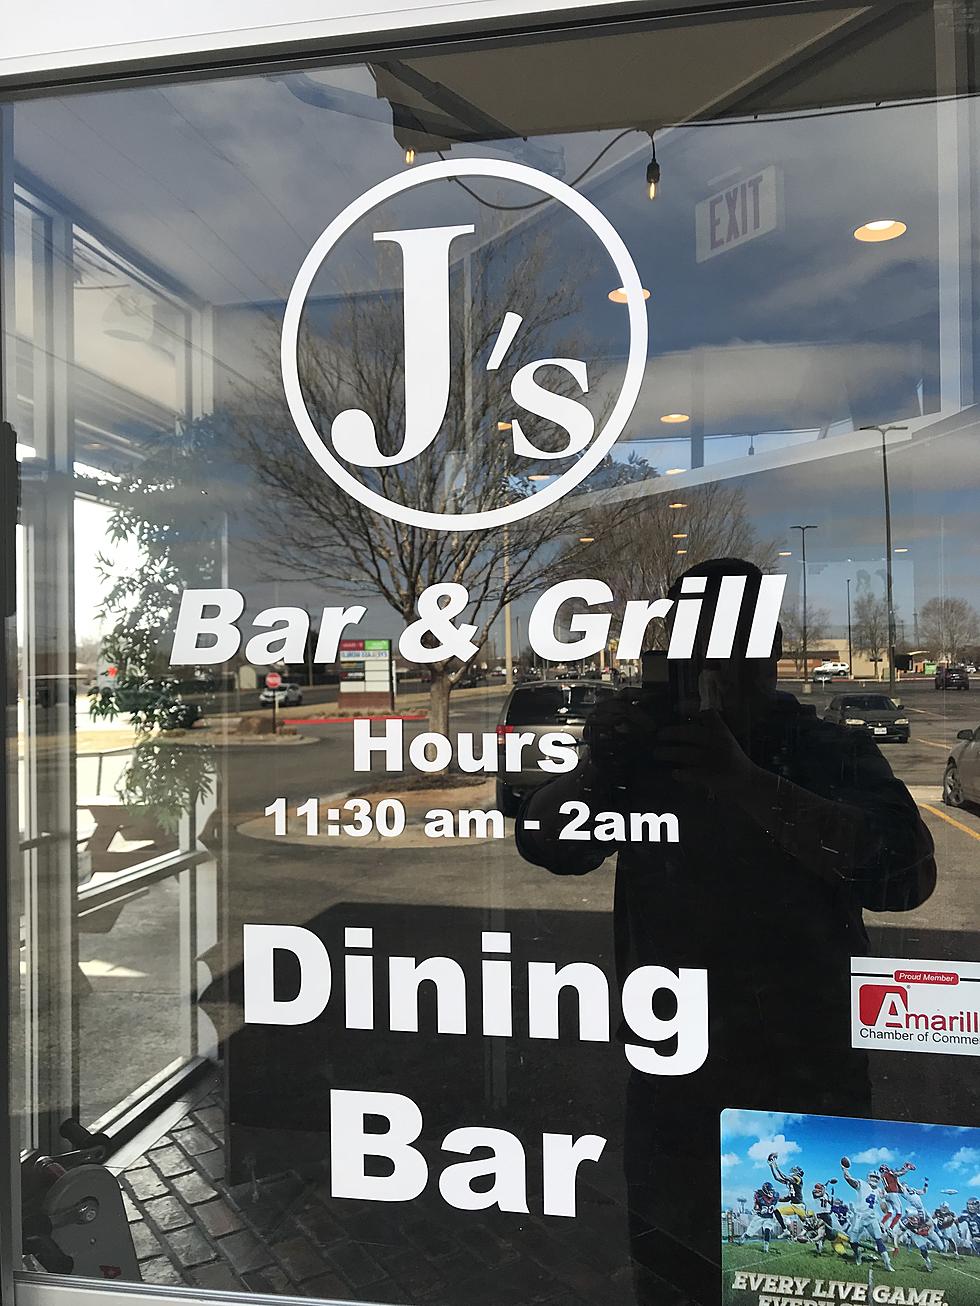 7 Bar and Grill Says Goodbye and Welcomes ‘J’s’